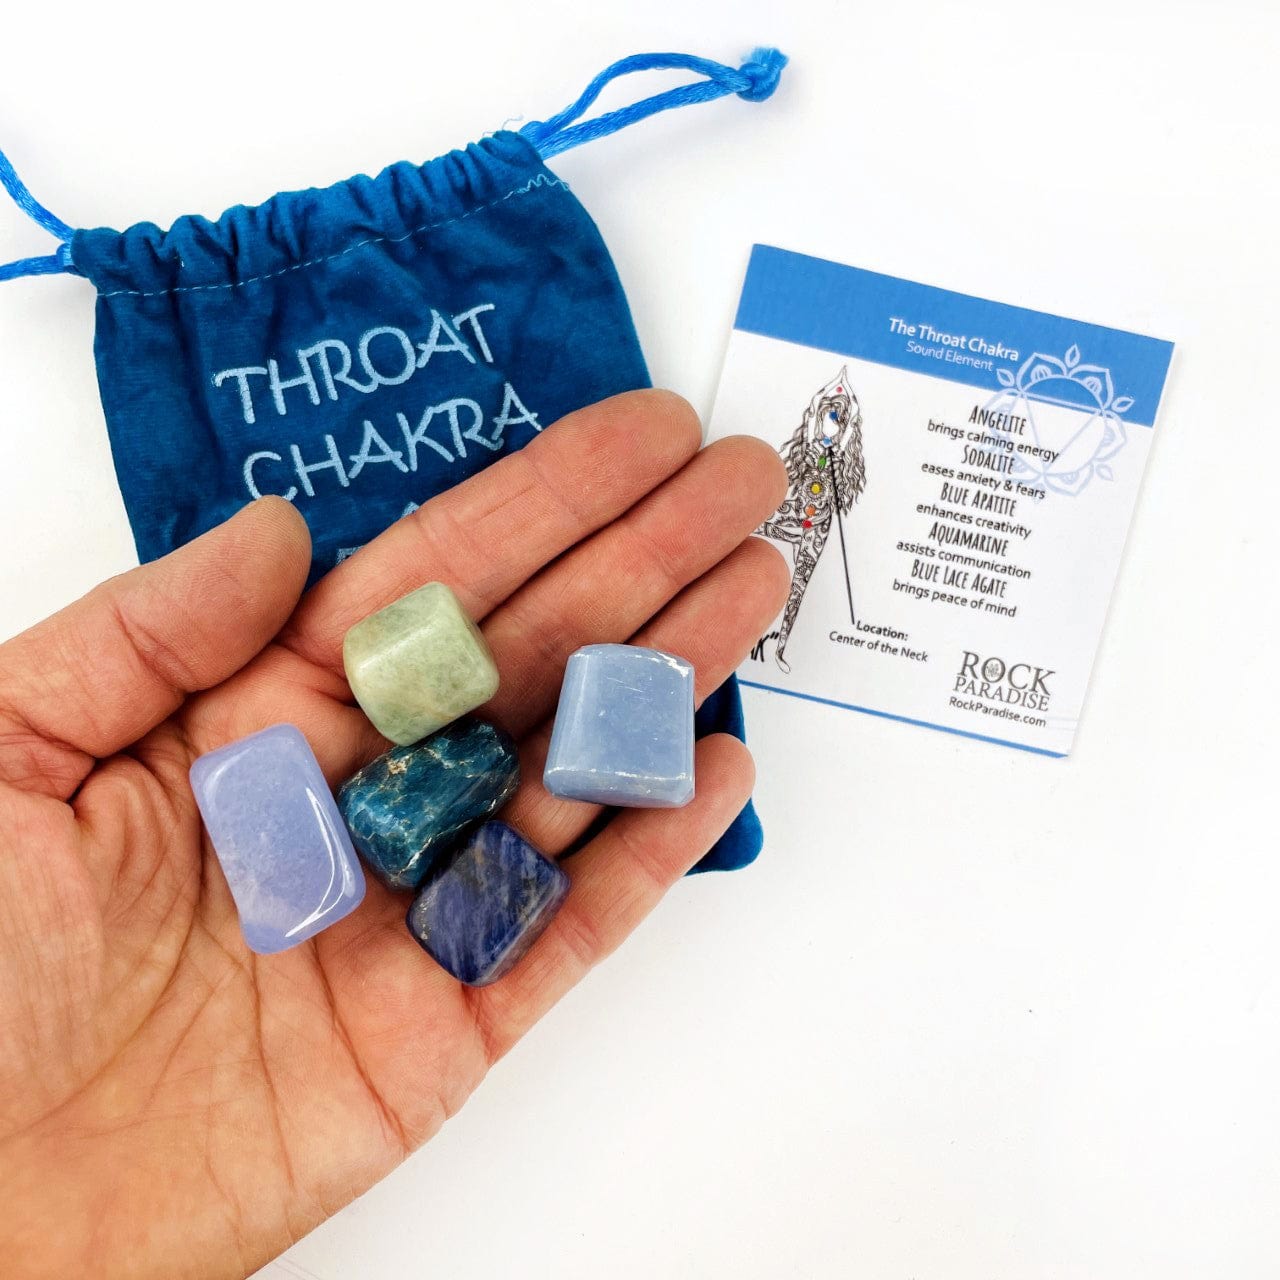 The Throat chakra stones in a hand with the pouch and information card behind